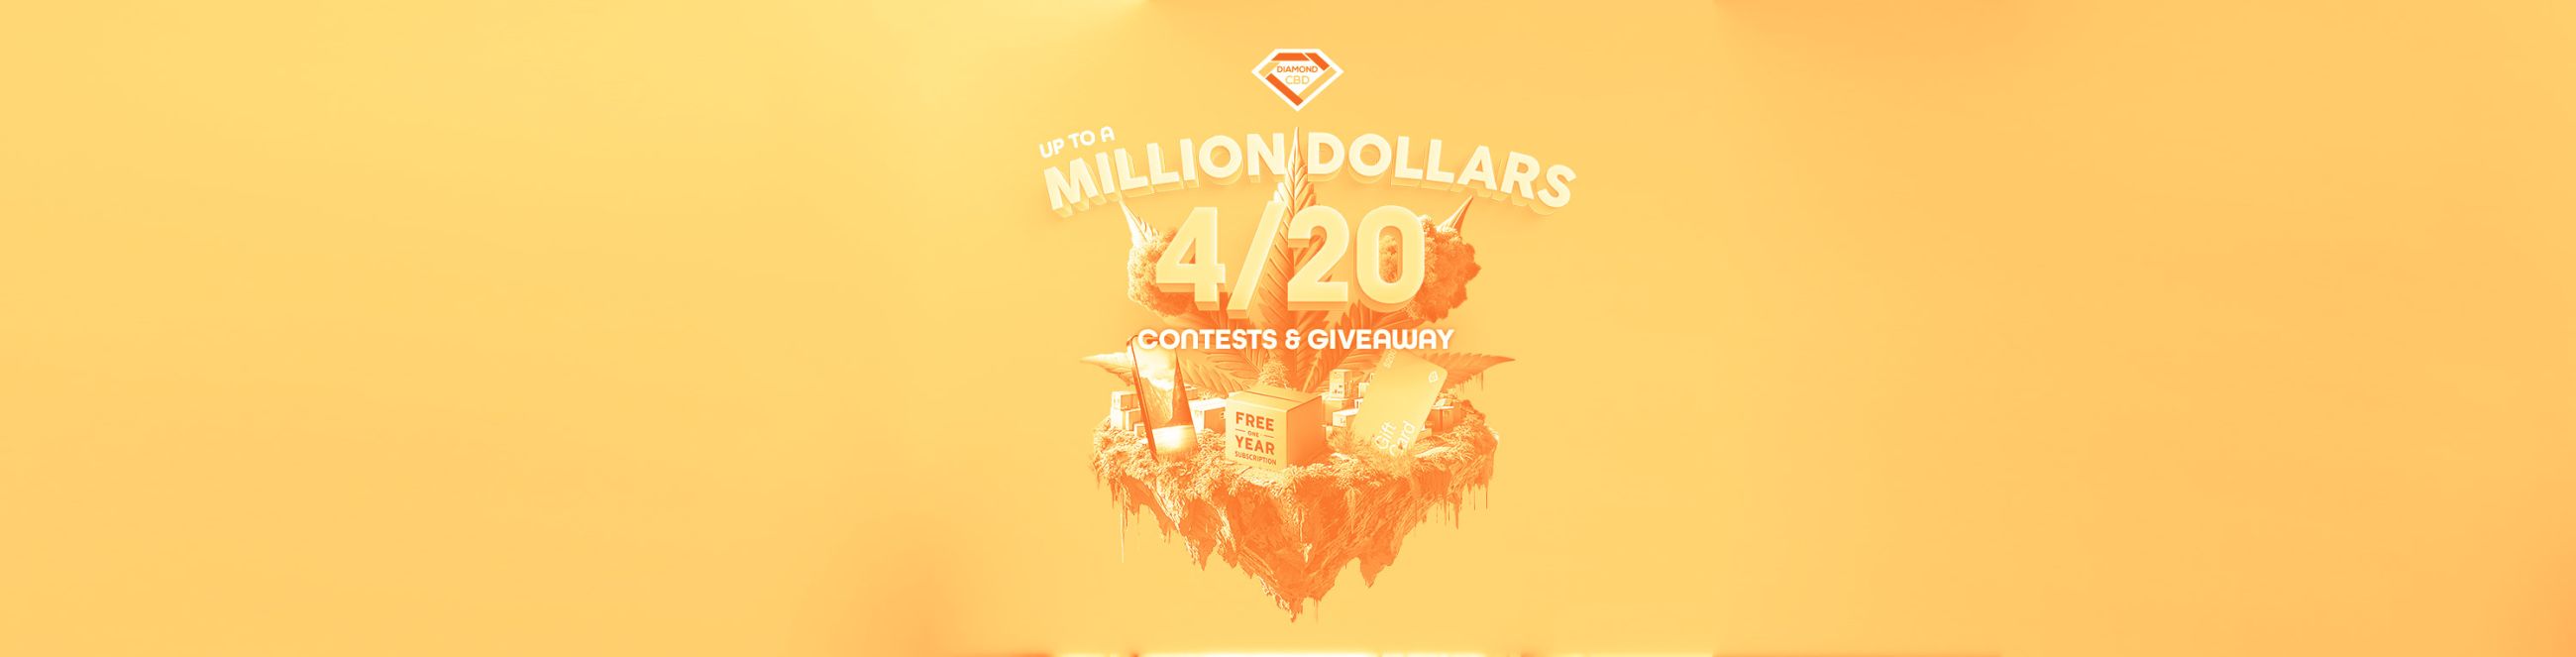 Up to a Million Dollars 4/20 Giveaway & Contests!